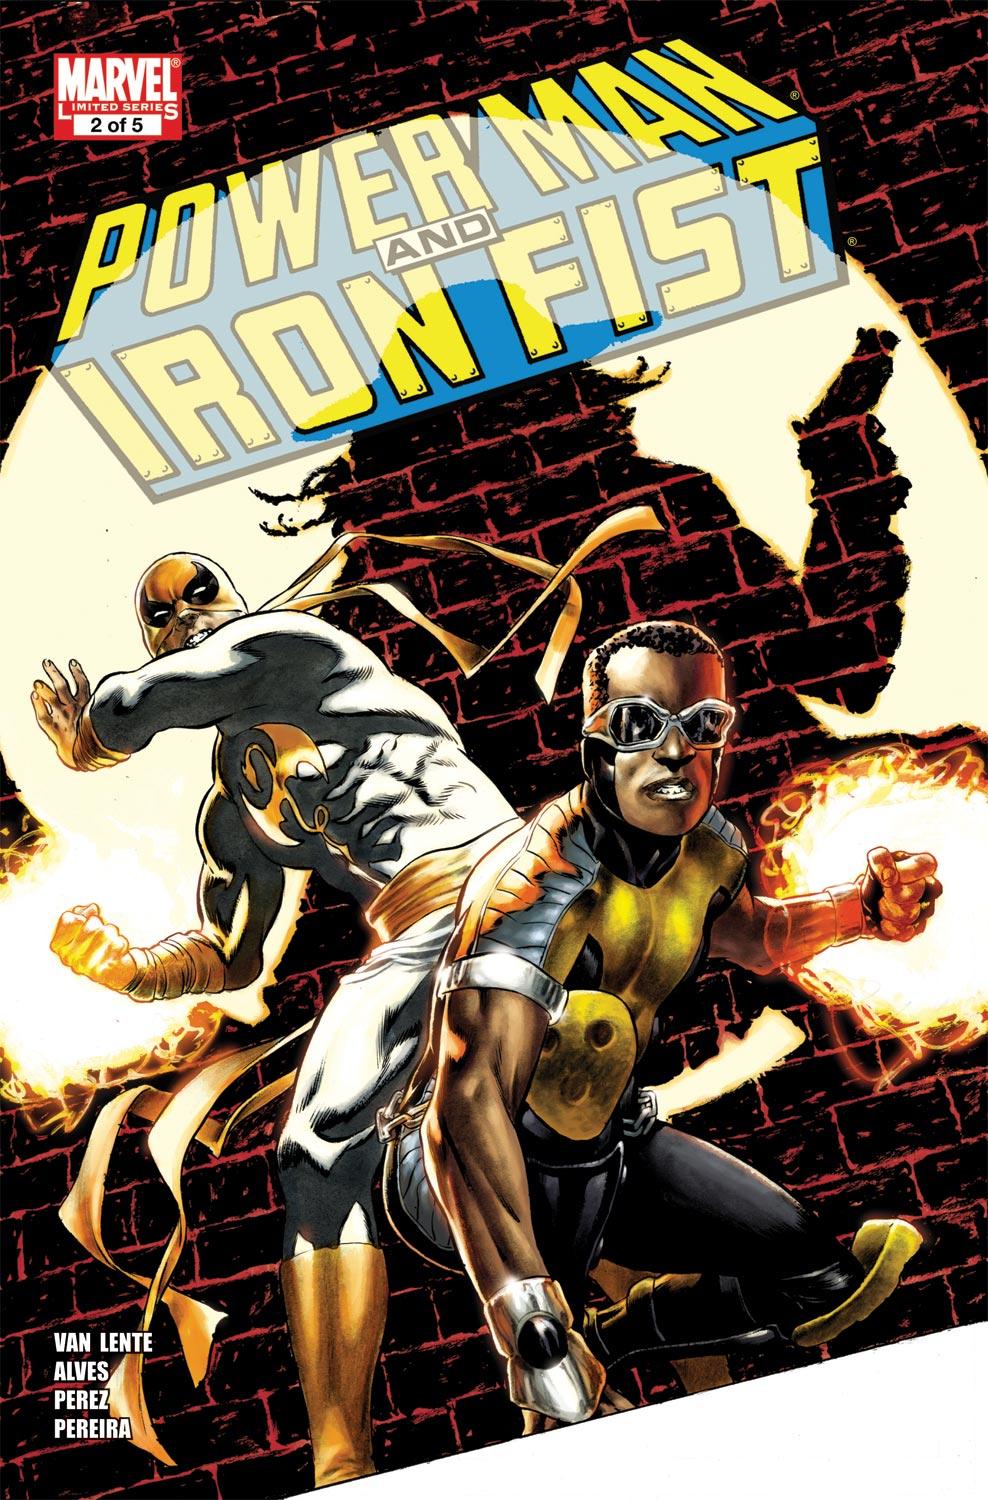 Power Man and Iron Fist (2010) #2